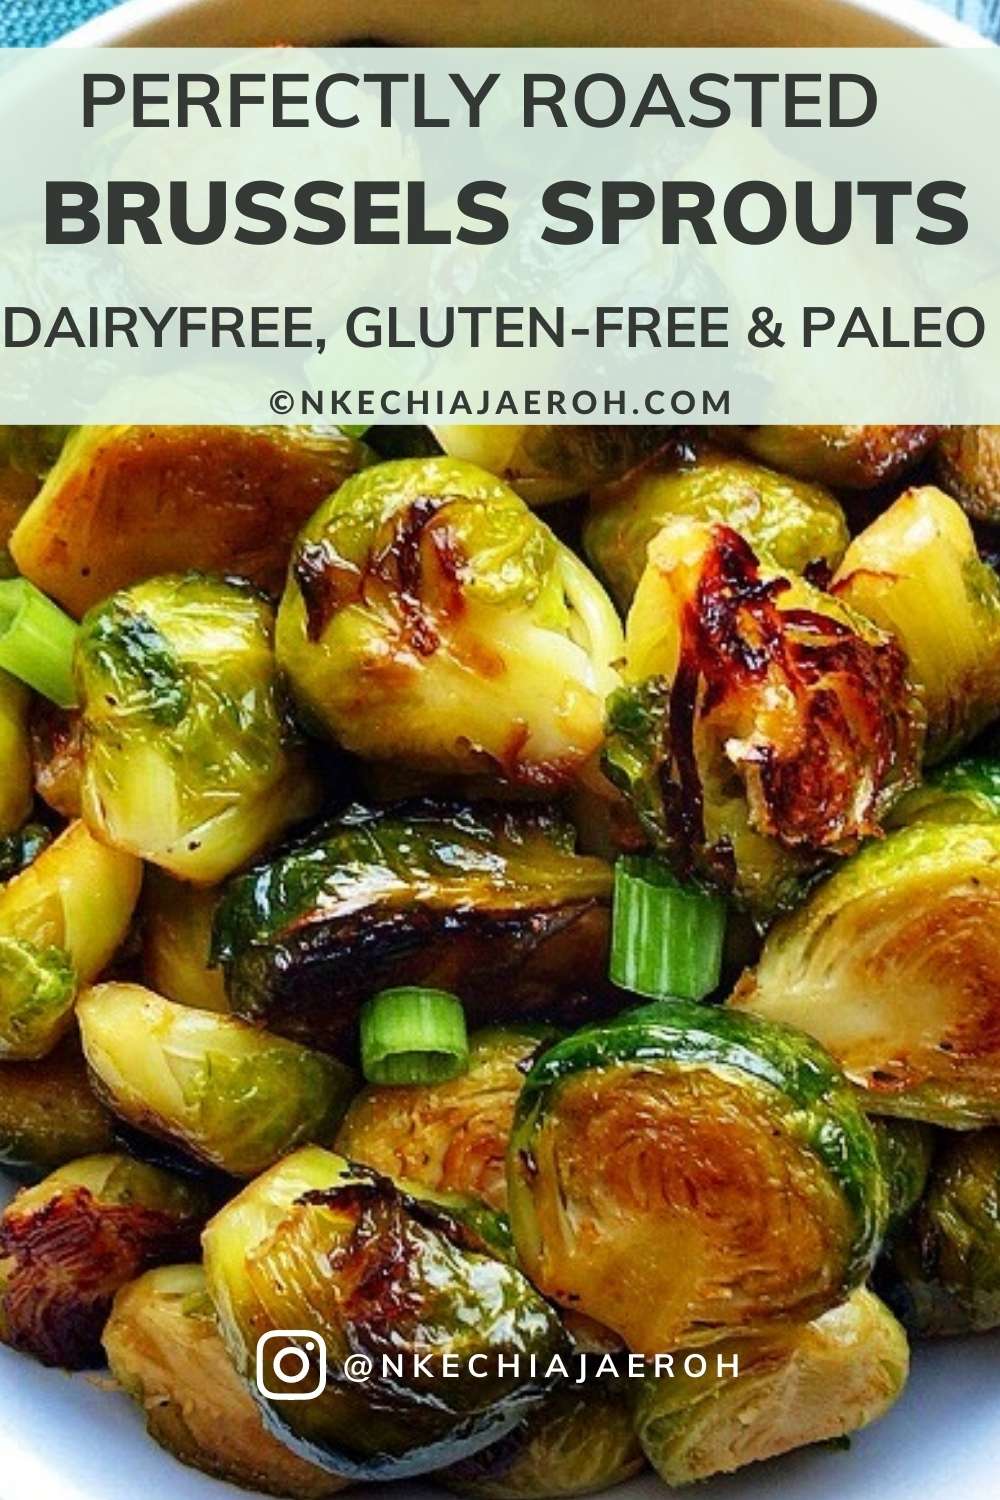 Vegan, Dairy-free, Gluten-free, and Paleo, Baked Brussels Sprouts Recipe is super easy to make and insanely delicious. This healthy side dish is a crowd-pleaser perfect for Thanksgiving, Christmas, Cookout, or family dinner! This healthy brussels sprouts recipe is low calorie and low carb, exactly the guilt-free side dish you need. Serve as a side, eat as snacks, or eat as a main meal – yes! #healthysidedish #thanksgivingrecipe #thanksgivingside #brusselsprouts #vegetables #vegan #plantbased